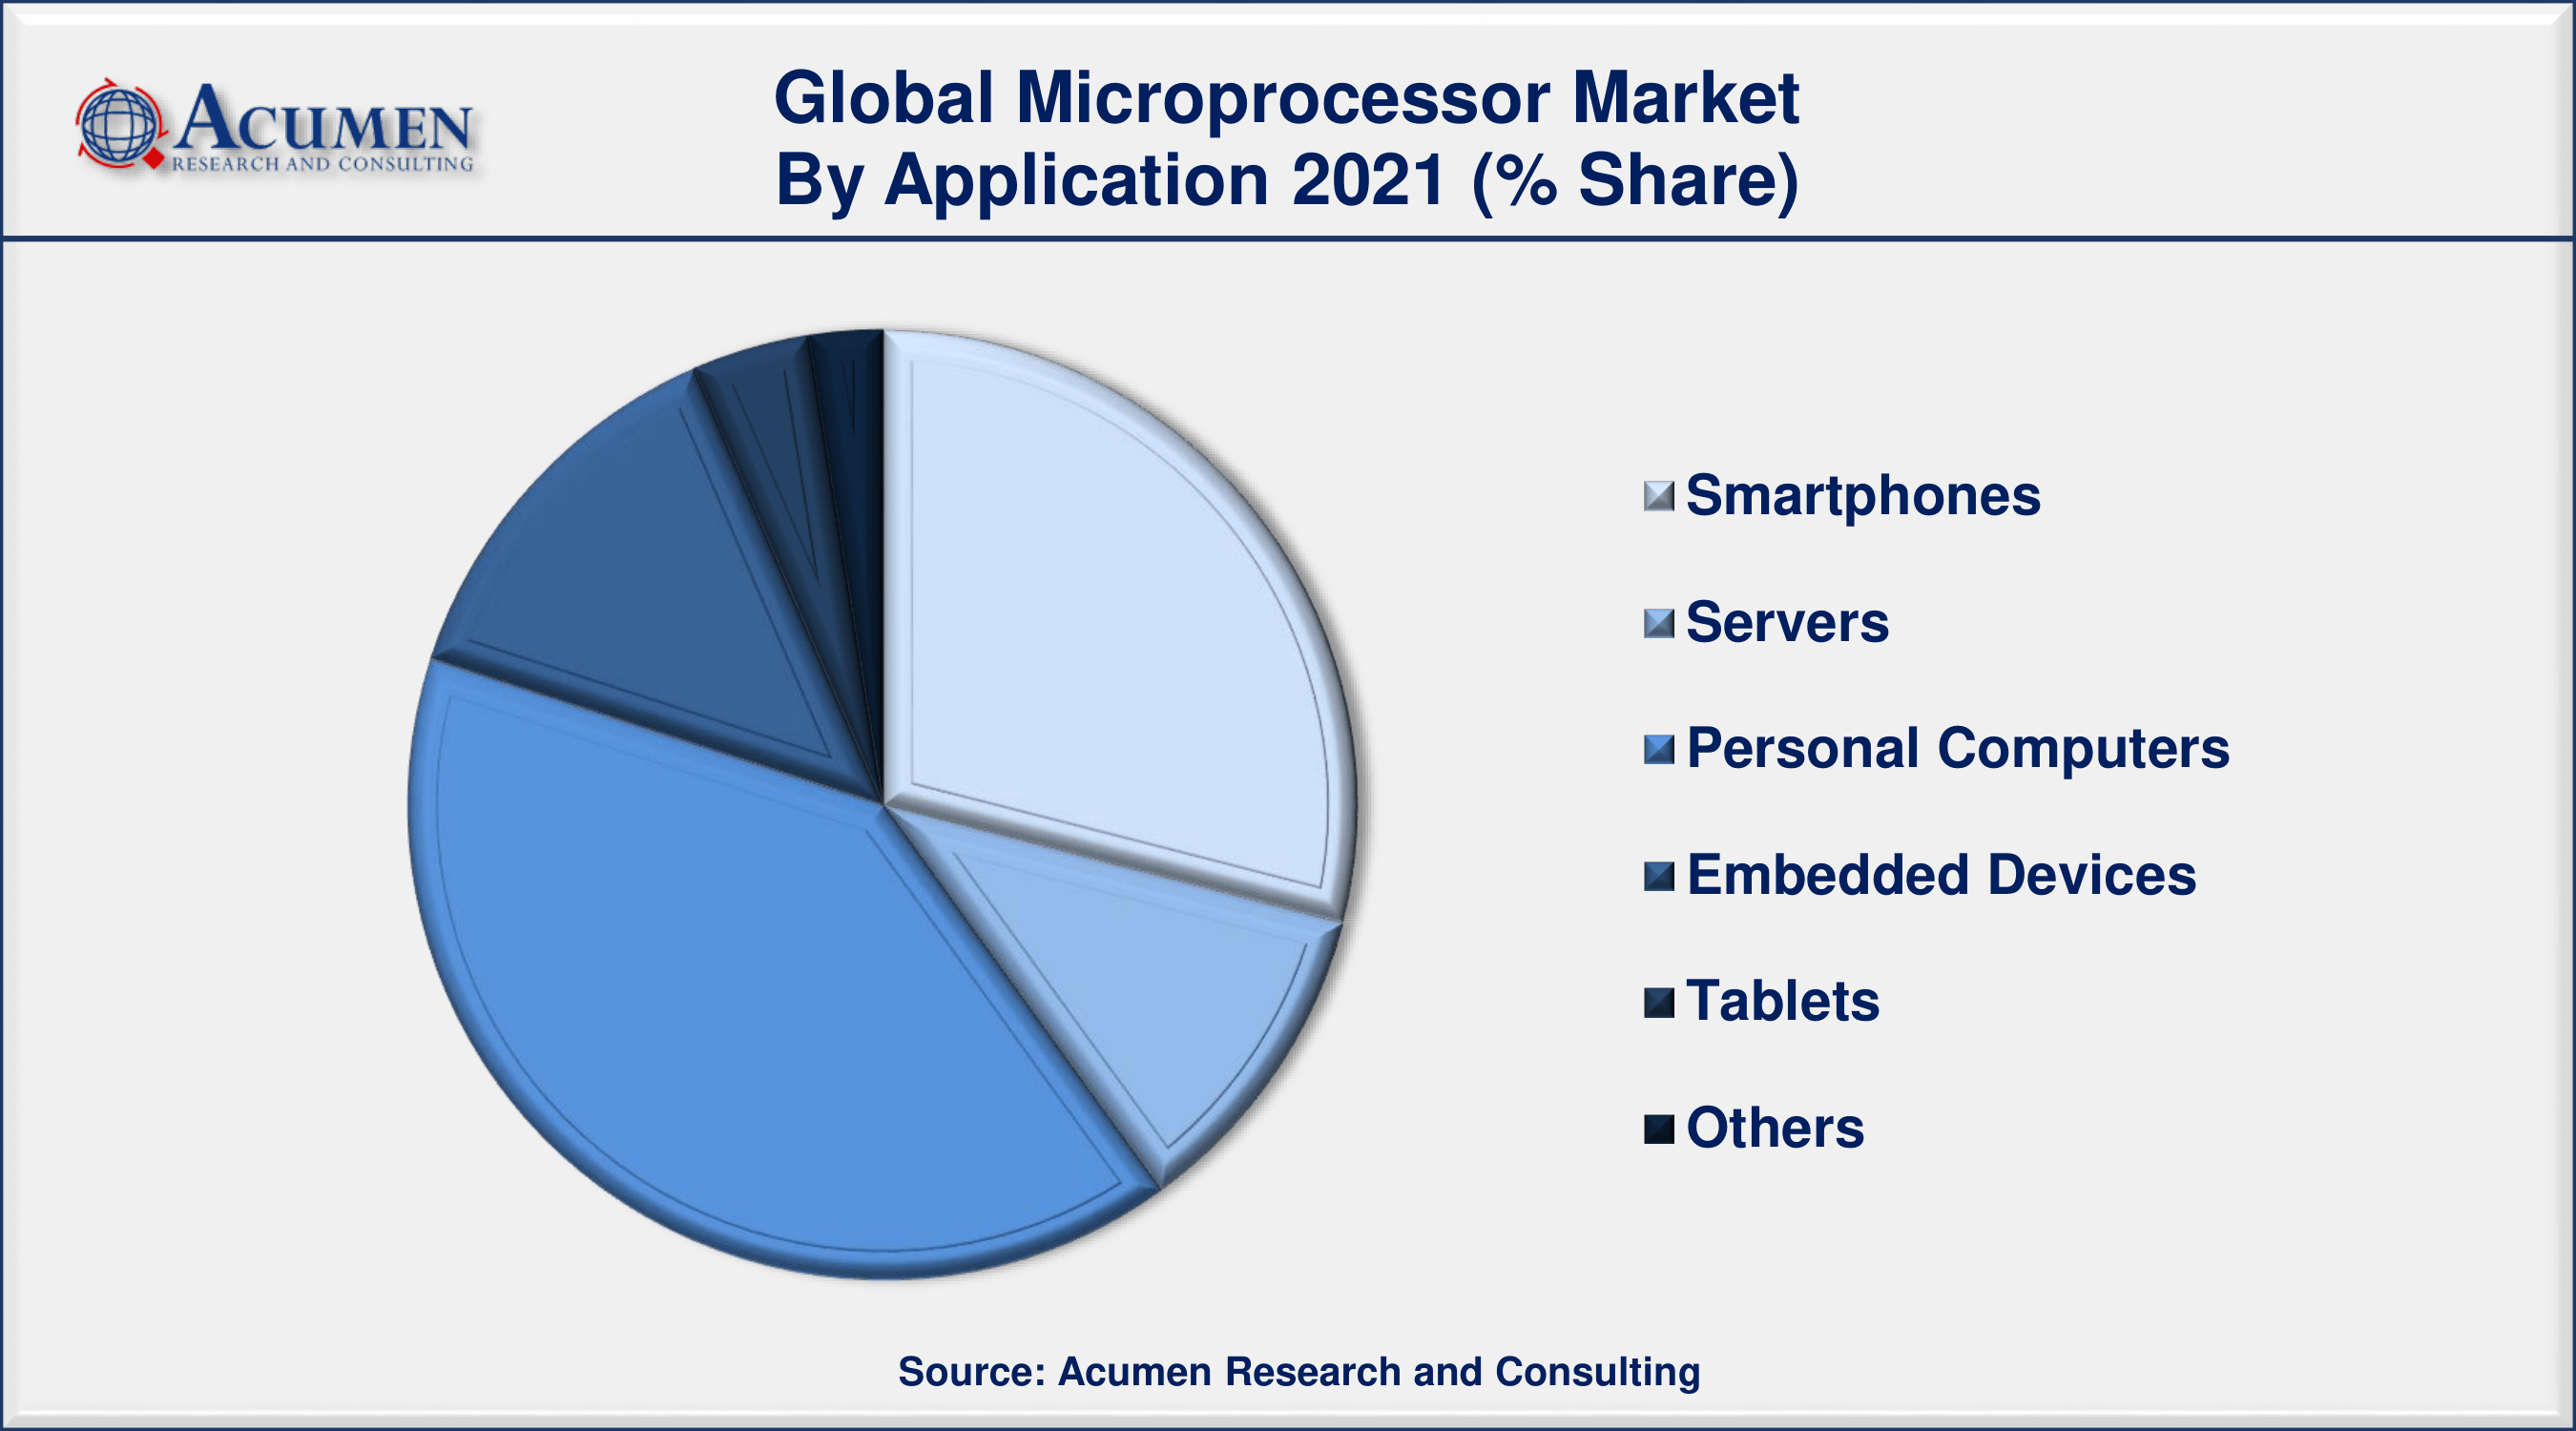 Among application, personal computers sector engaged more than 38% of the total market share